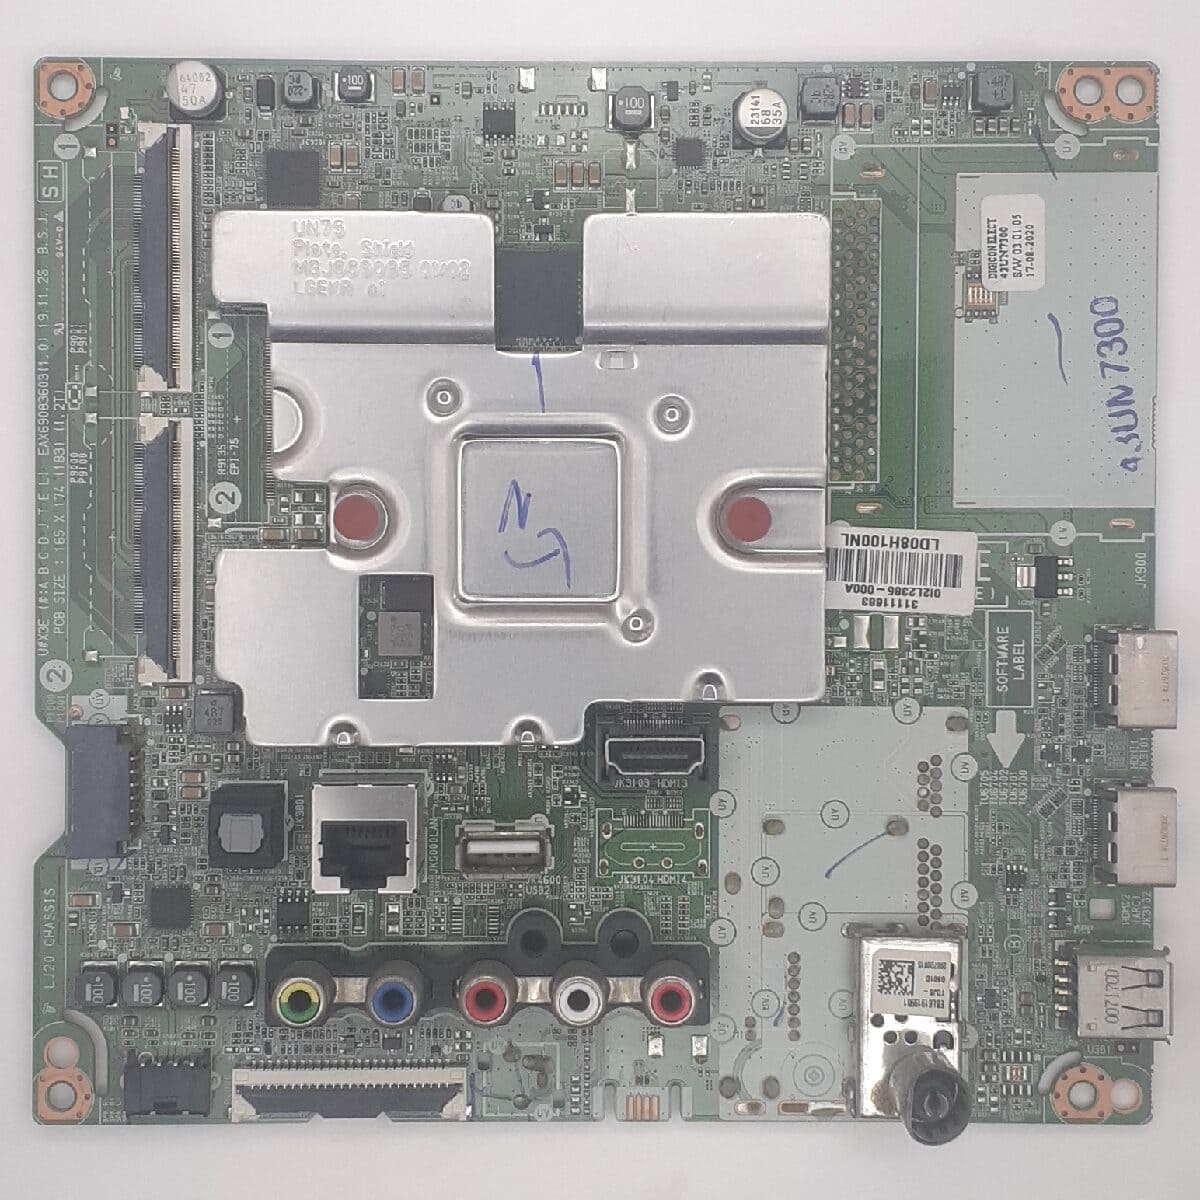 43UN7300PTC LG MOTHERBOARD FOR LED TV